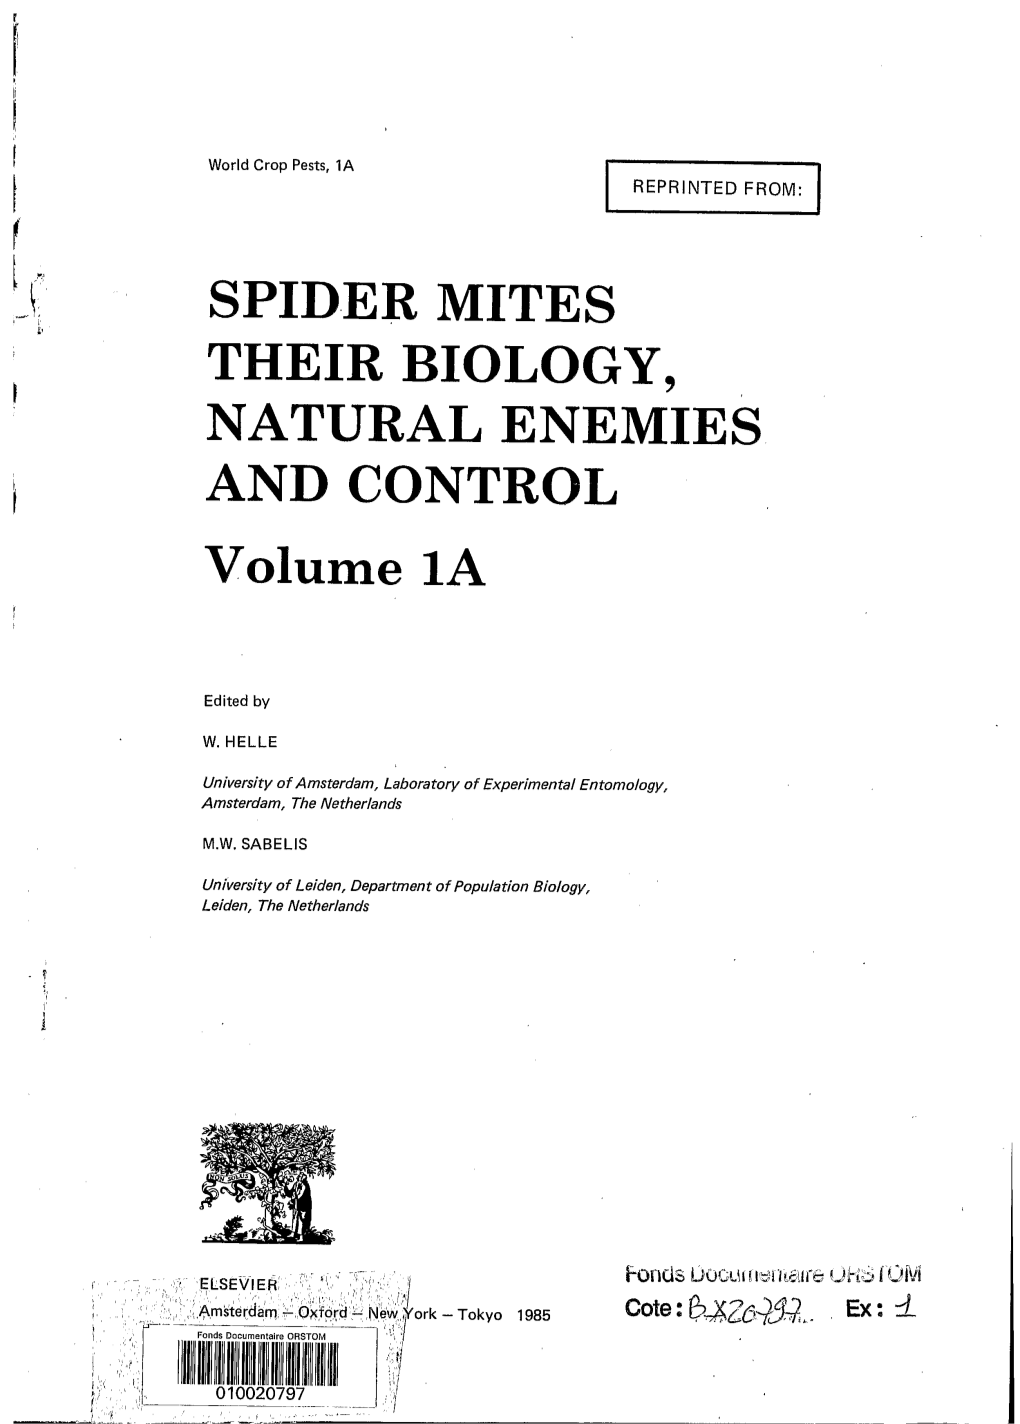 SPIDER MITES THEIR BIOLOGY, NATURAL ENEMIES and CONTR Olume 1A